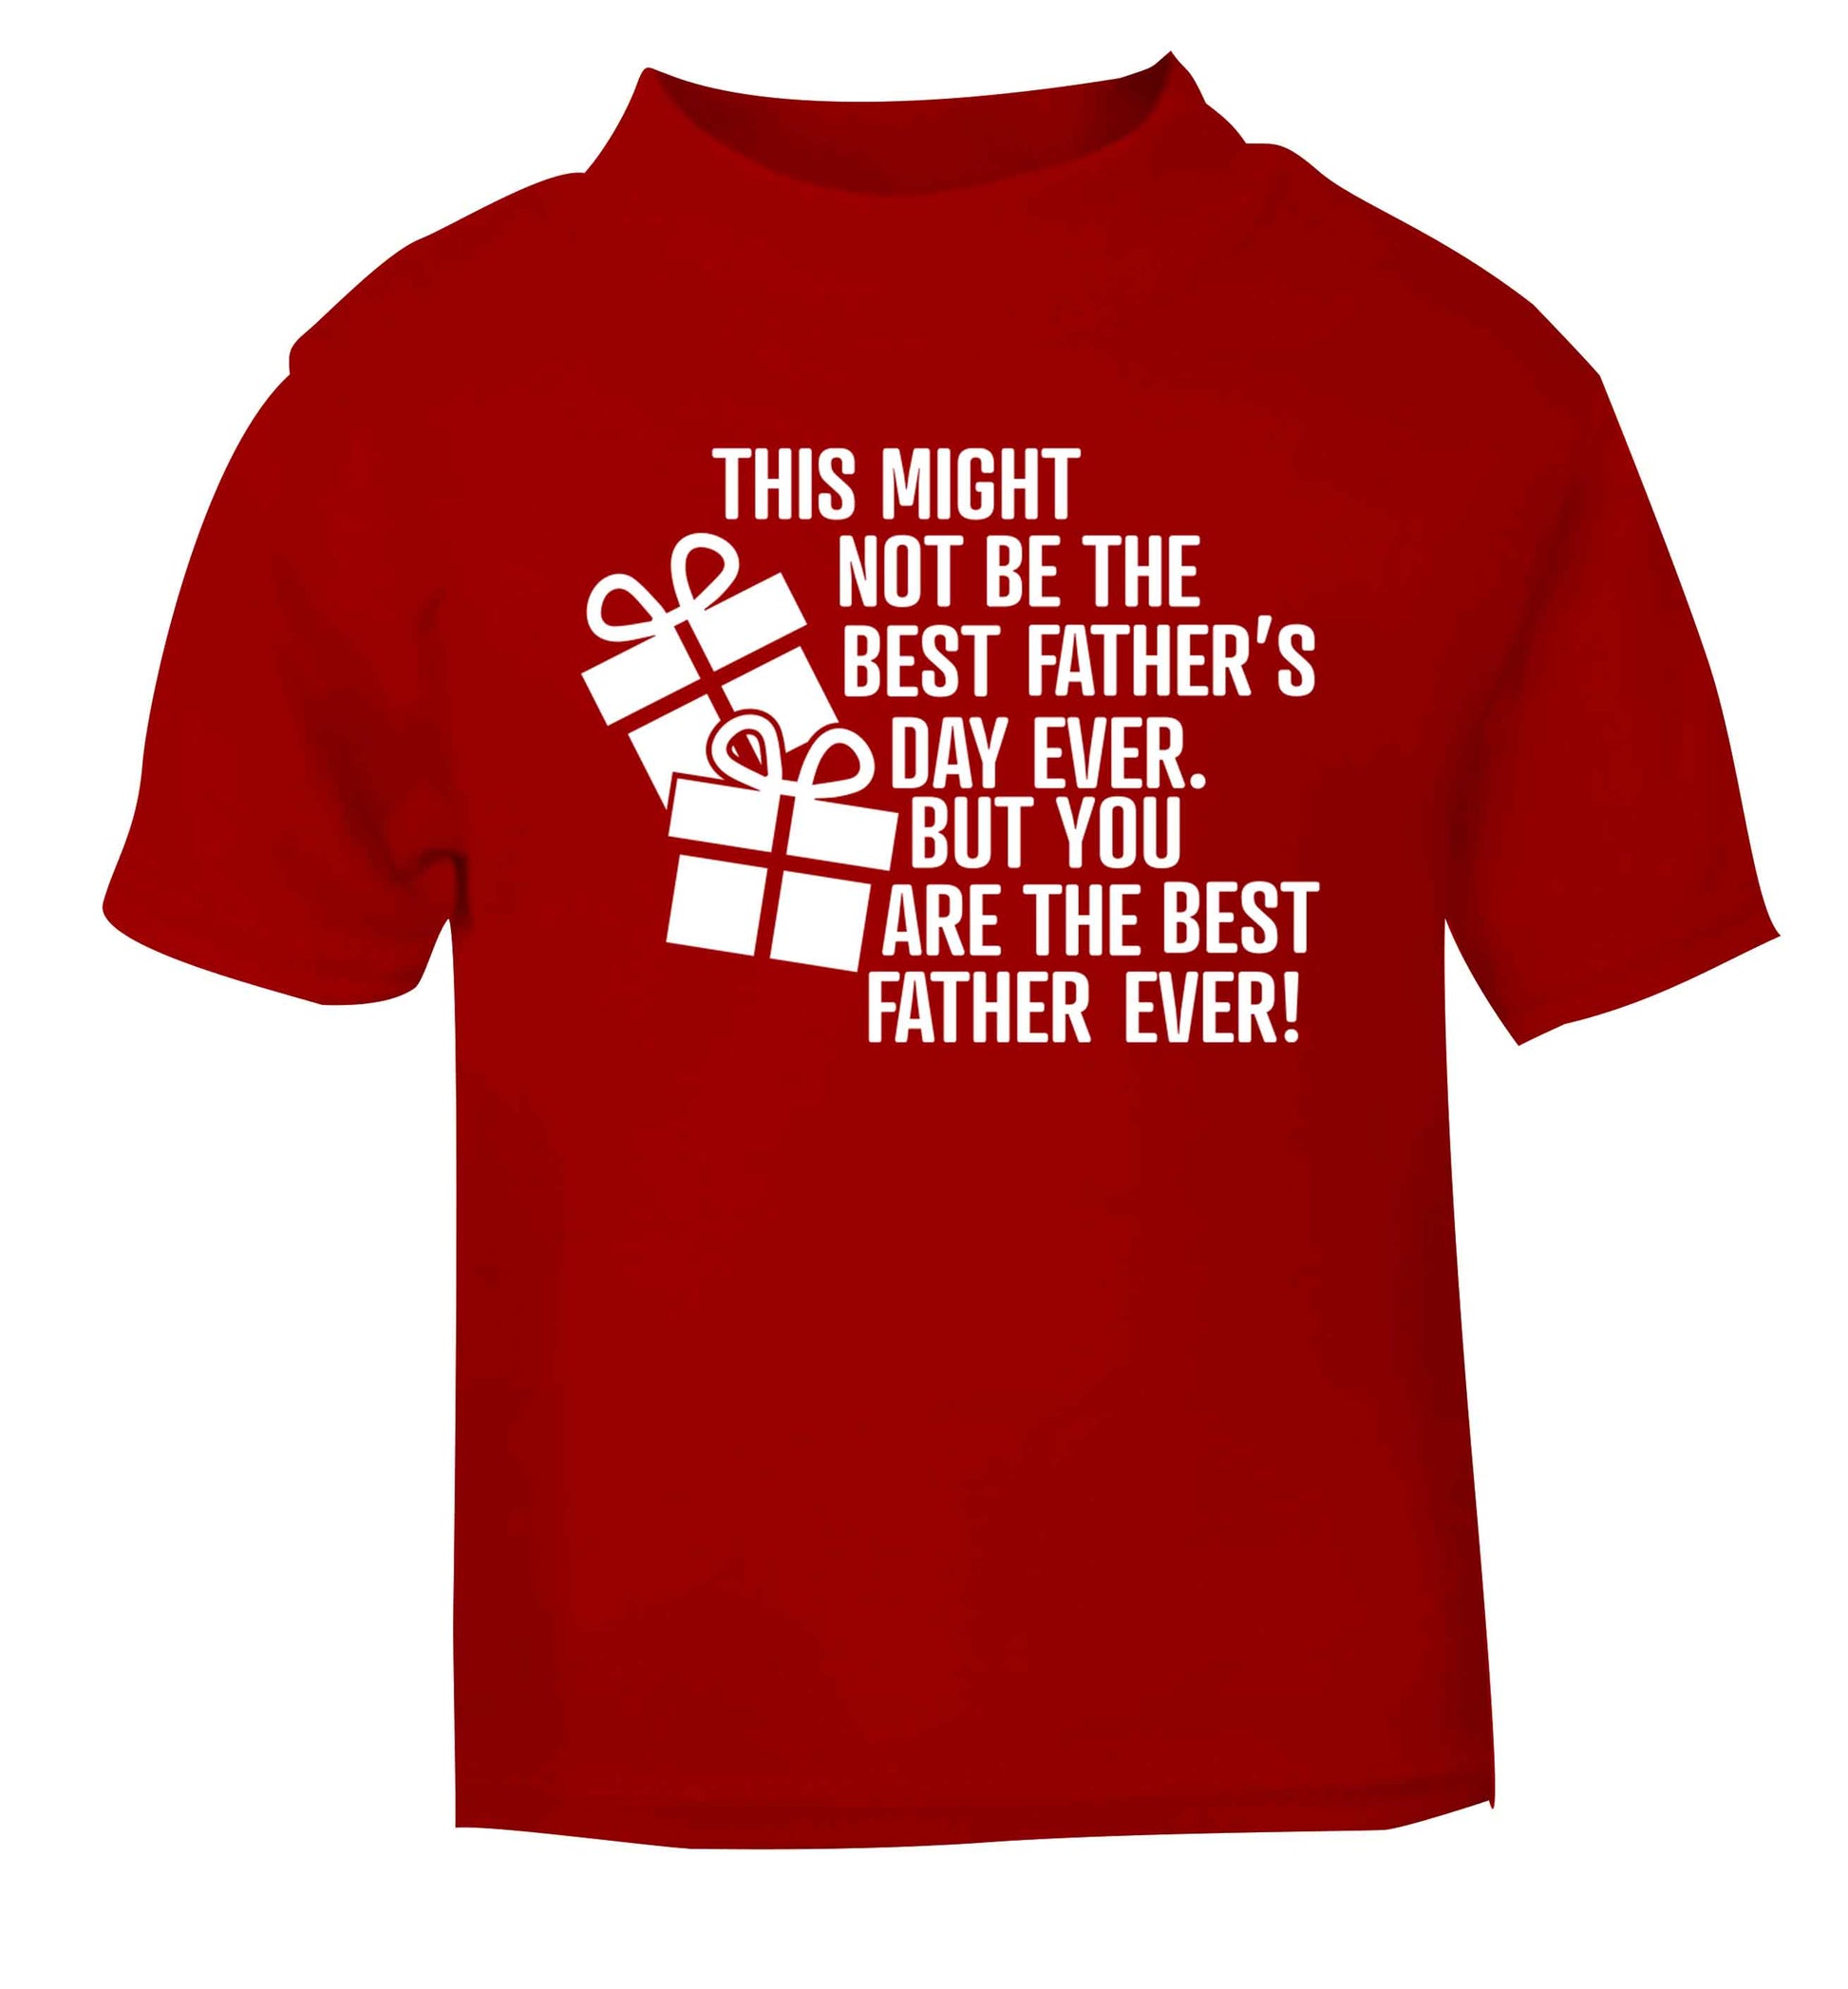 It might not be the best Father's Day ever but you are the best father ever! red baby toddler Tshirt 2 Years